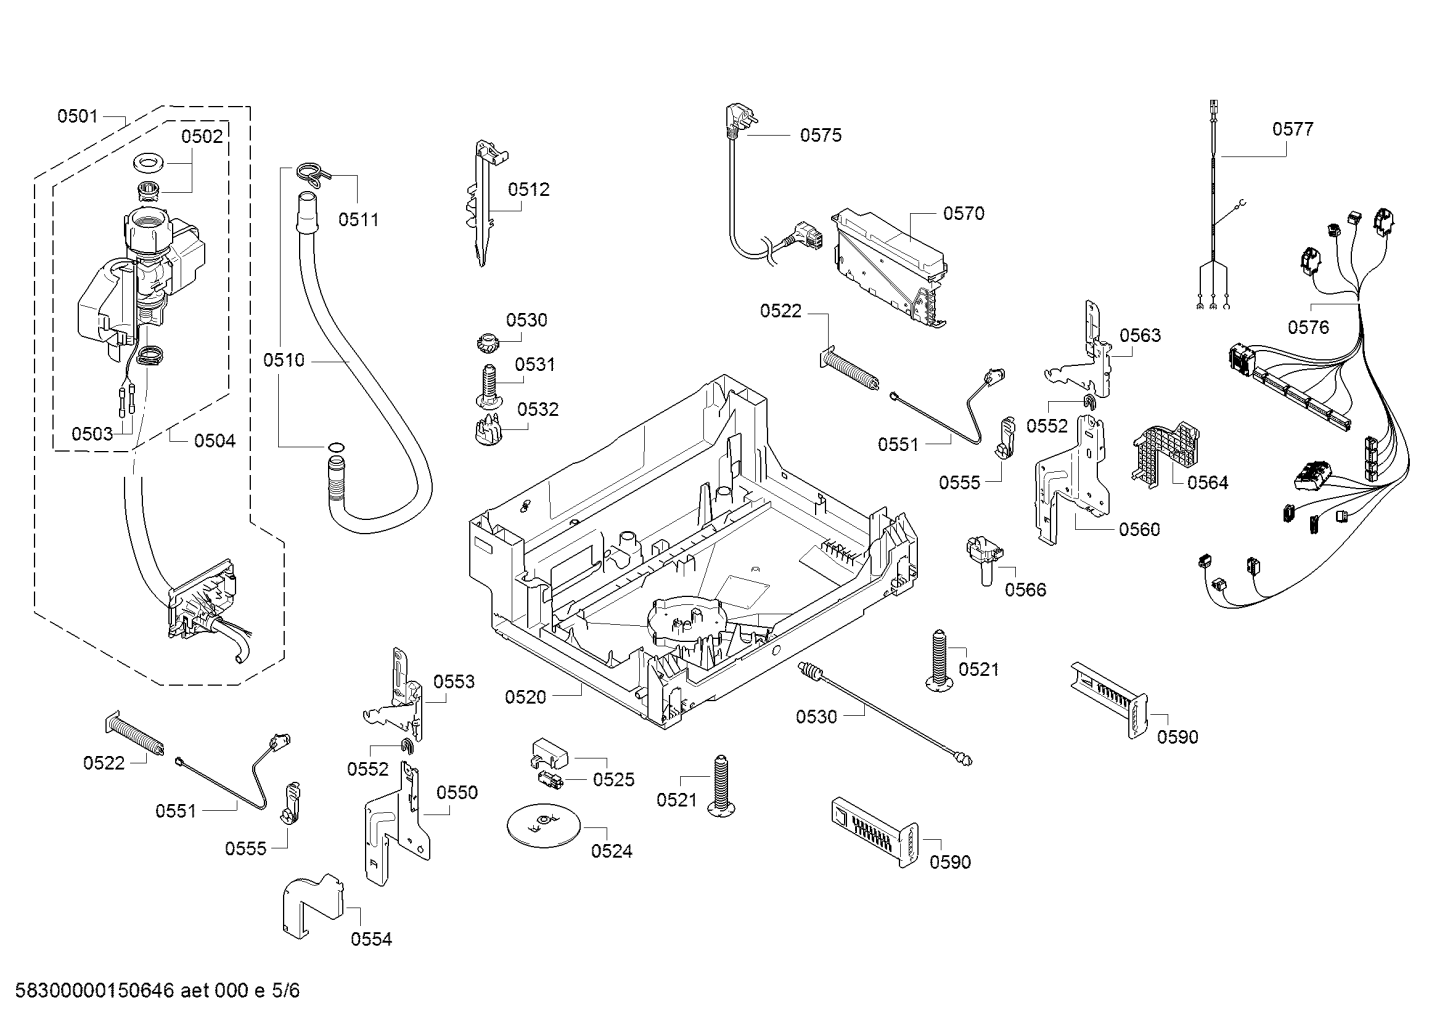 drawing_link_9_device_1584572